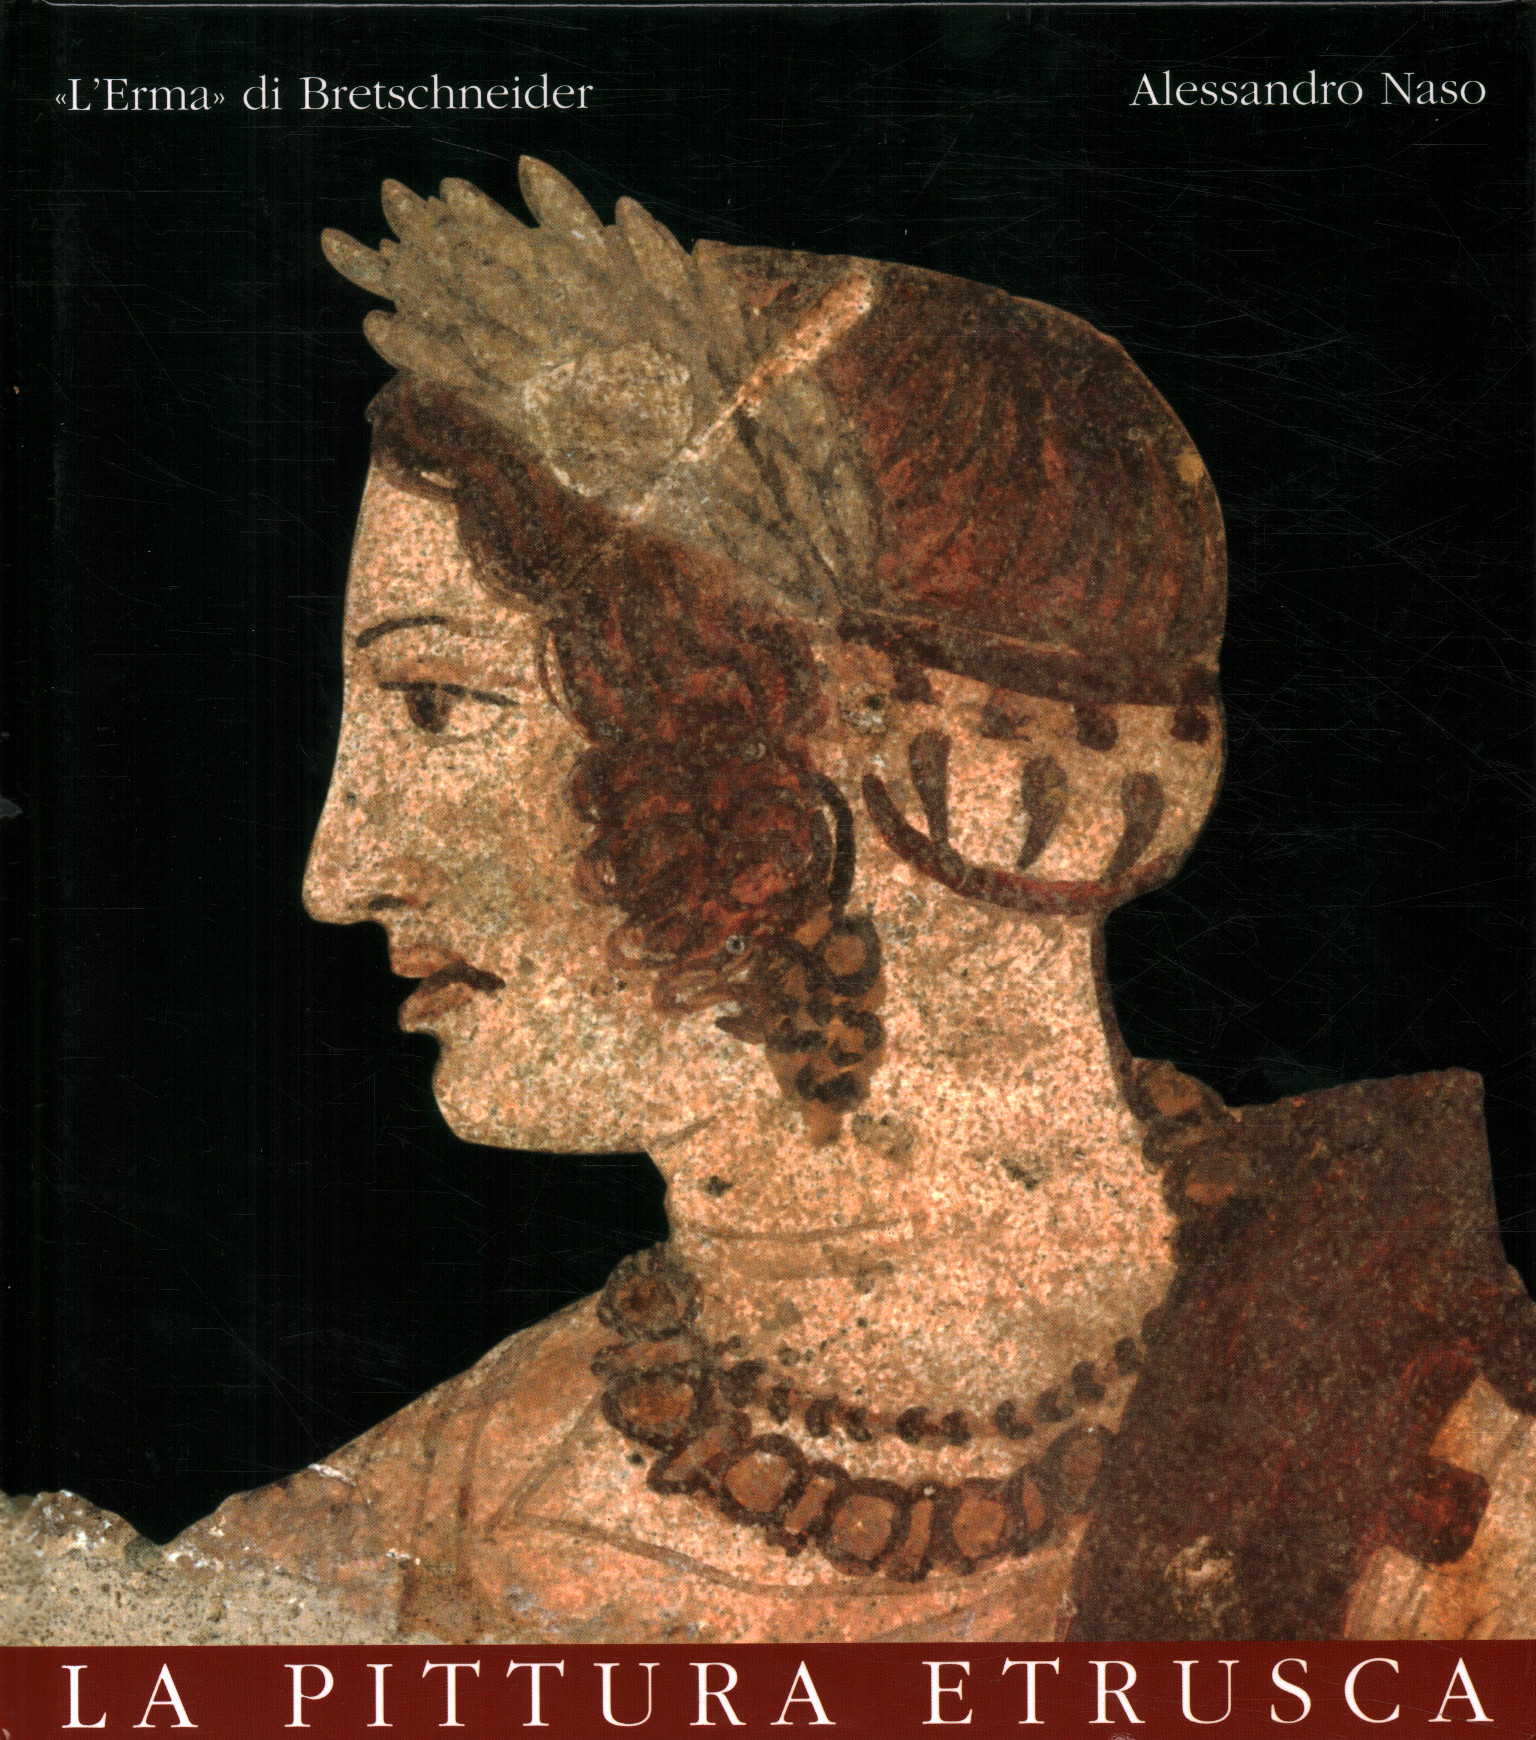 Etruscan painting. Short guide